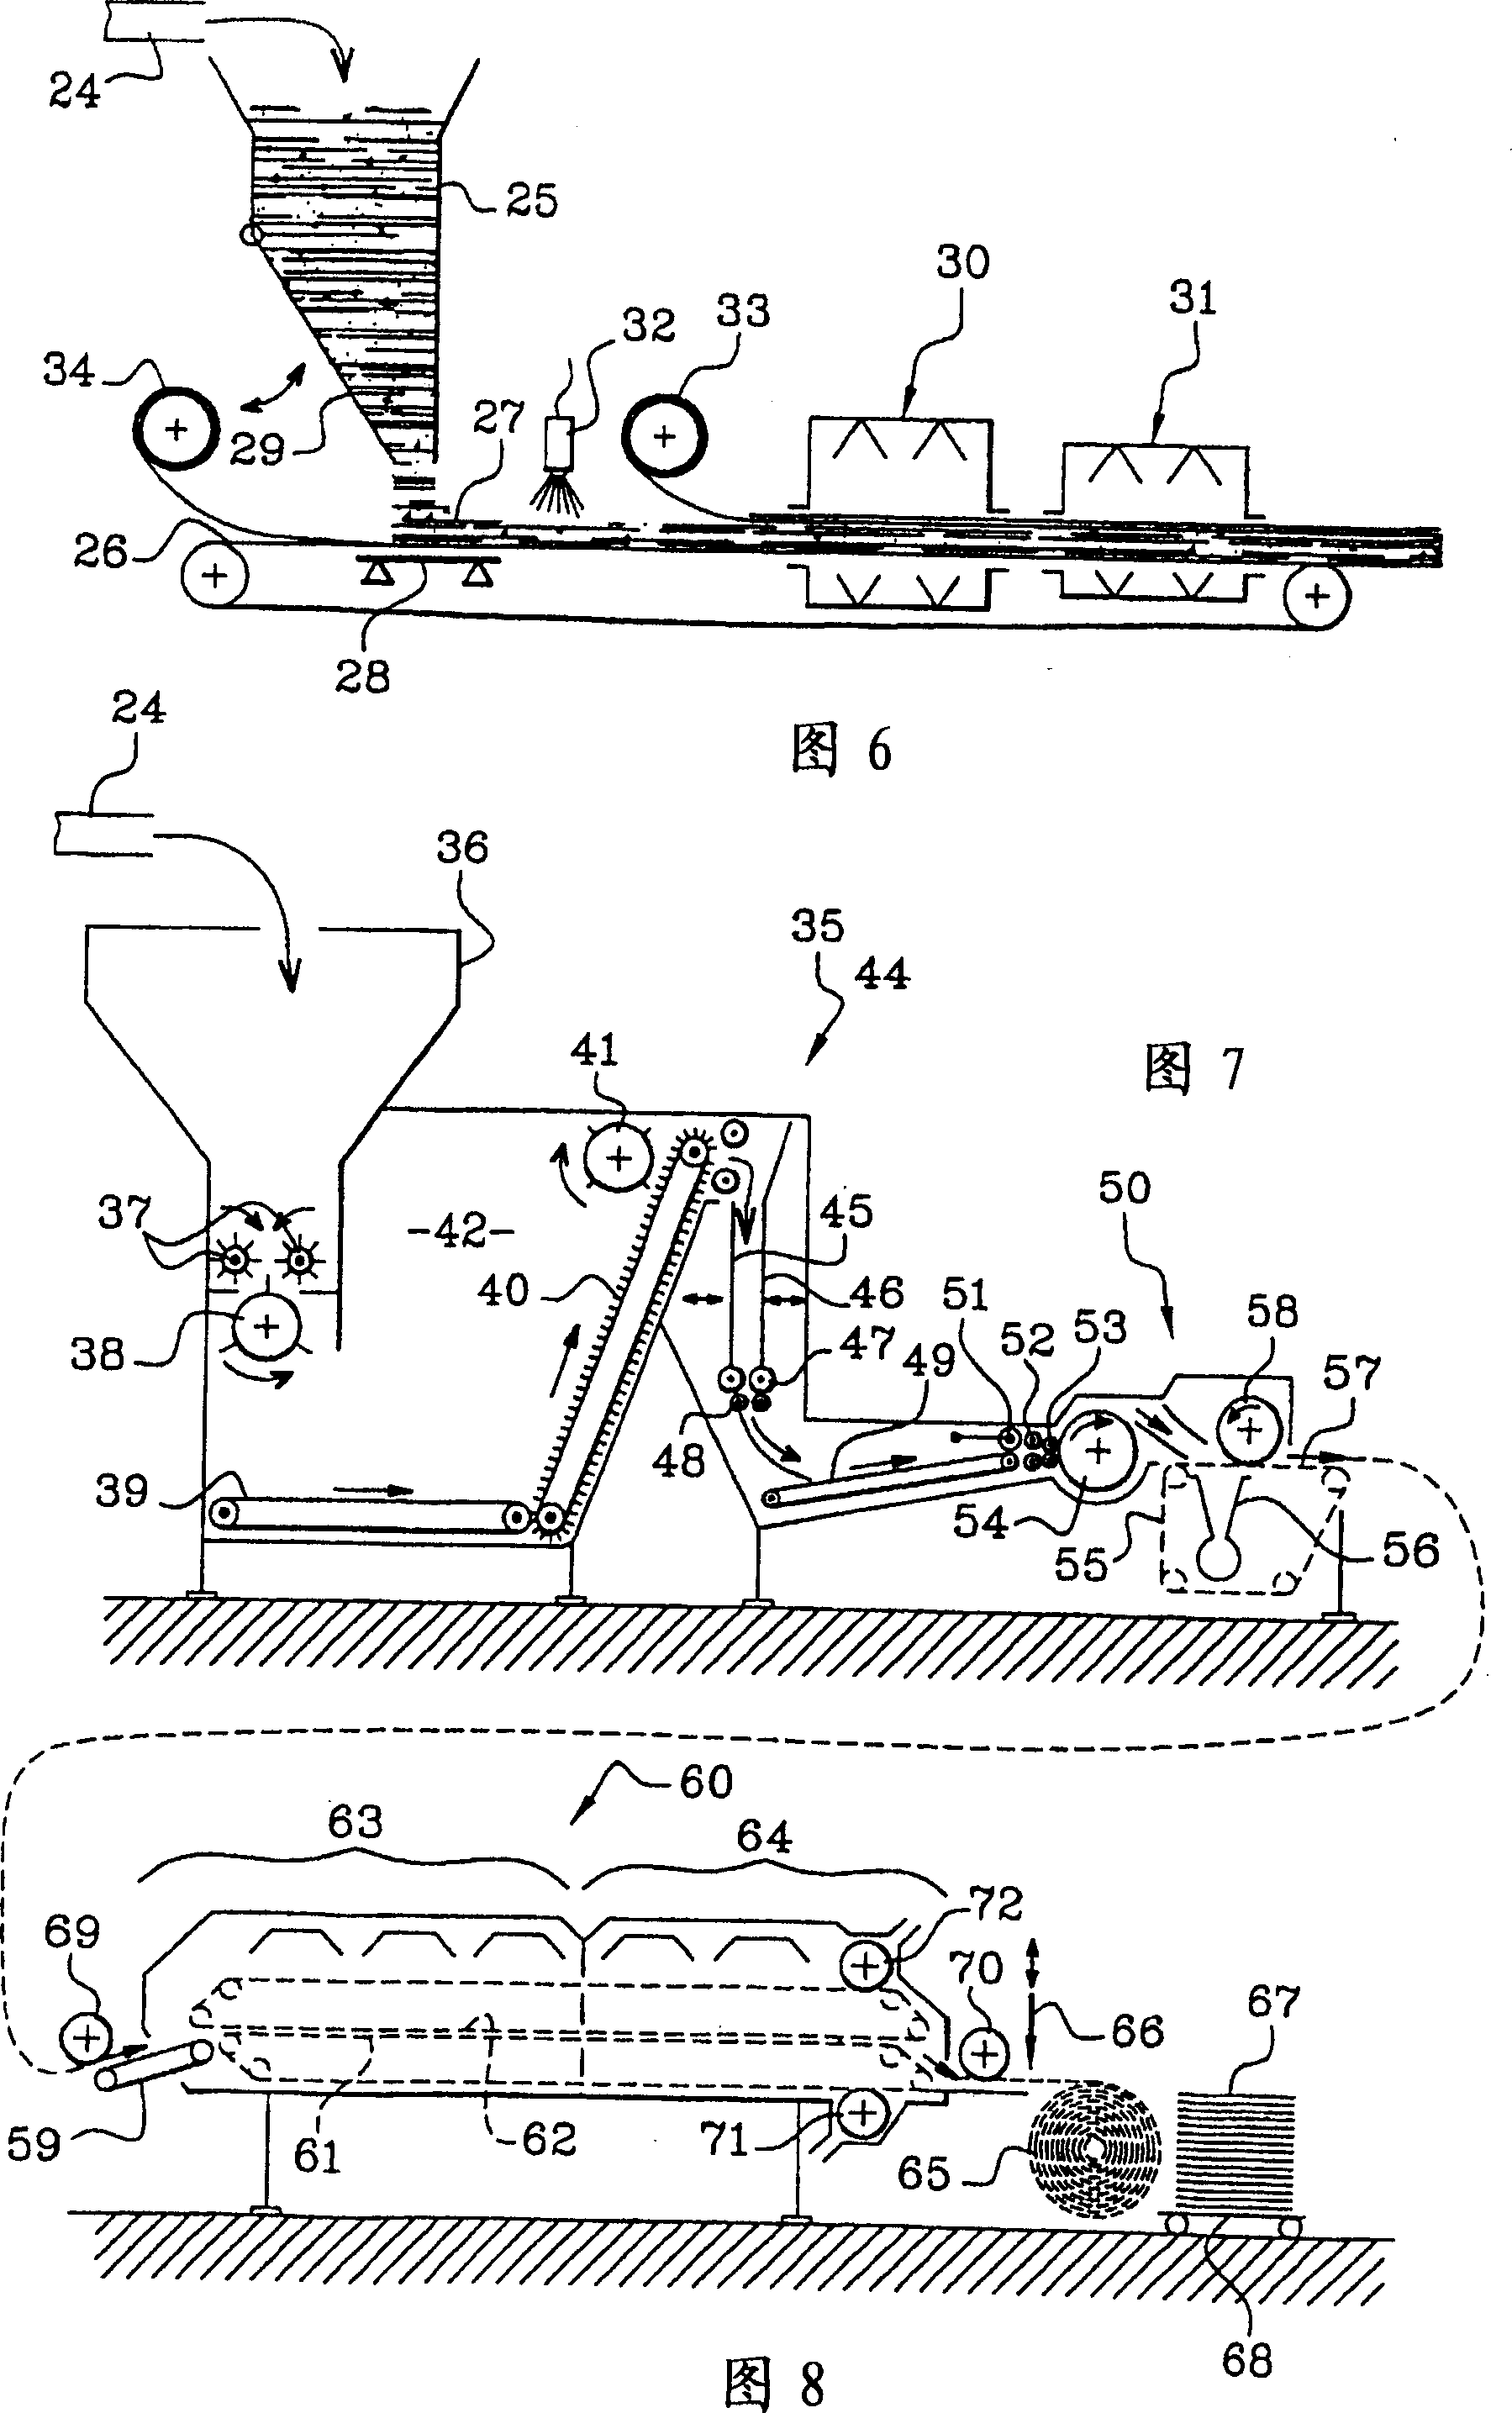 Feather-based padding product, preparation method and installation for implementing said method